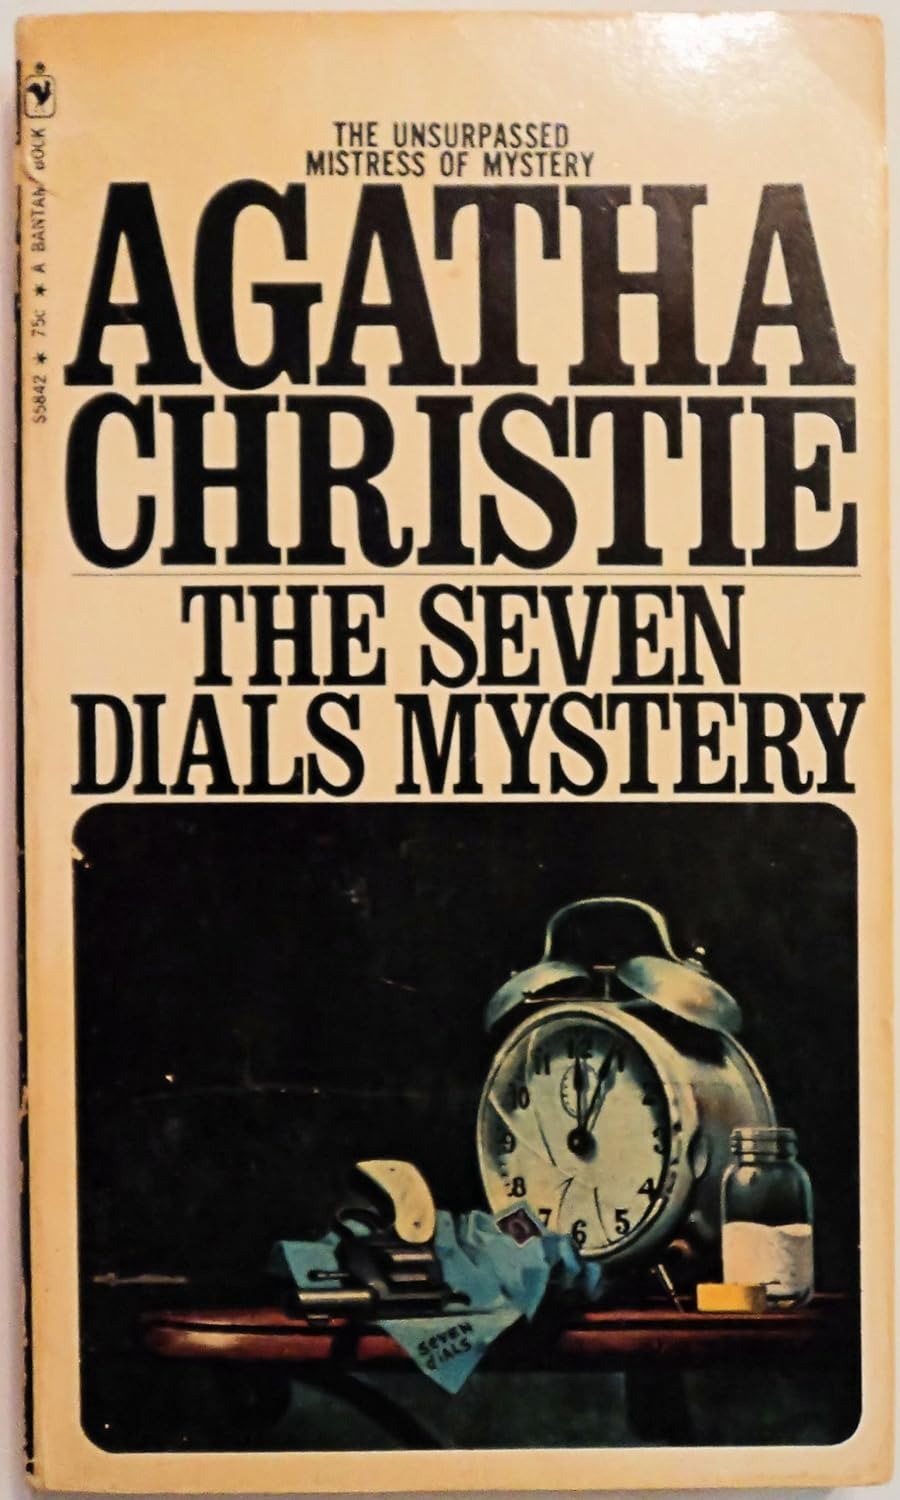 #The Seven Dials Mystery: Netflix Orders Agatha Christie Series Adapted by Broadchurch’s Chris Chibnall